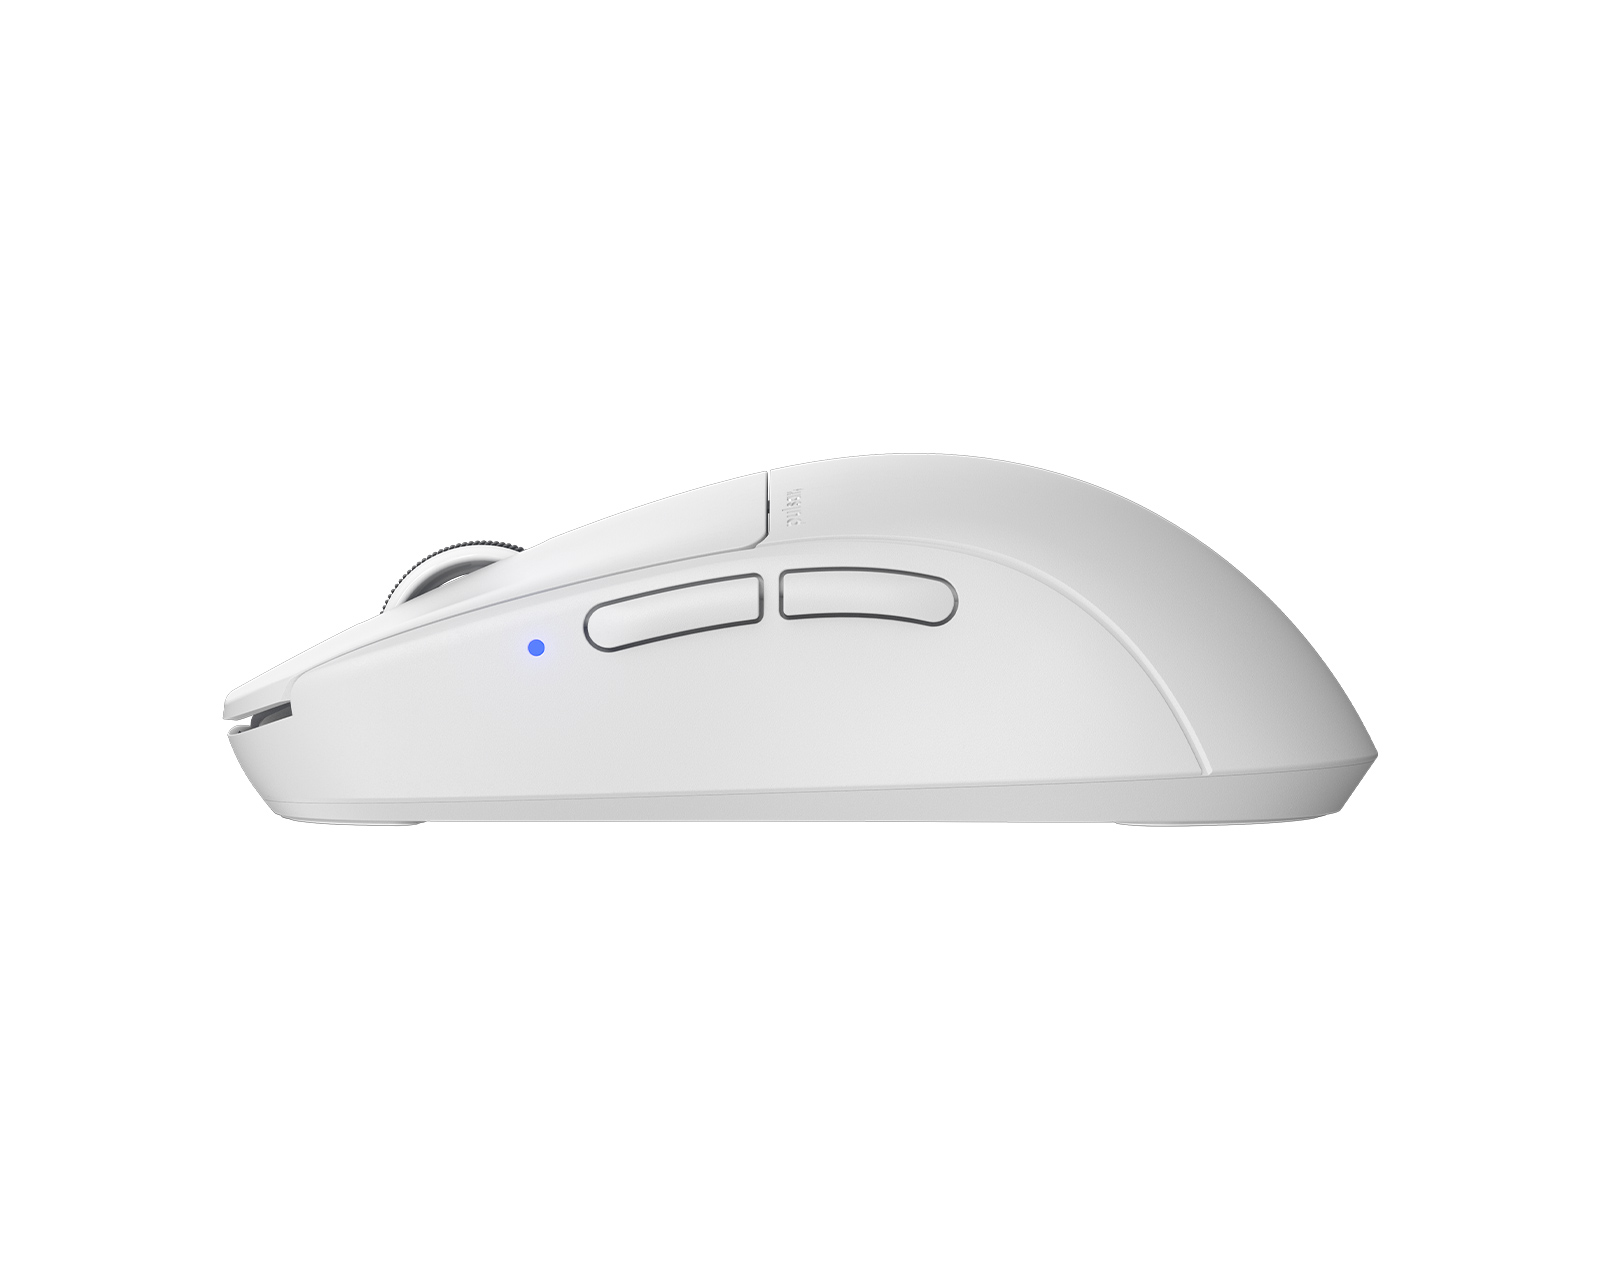 Pulsar X2 Wireless Gaming Mouse - White